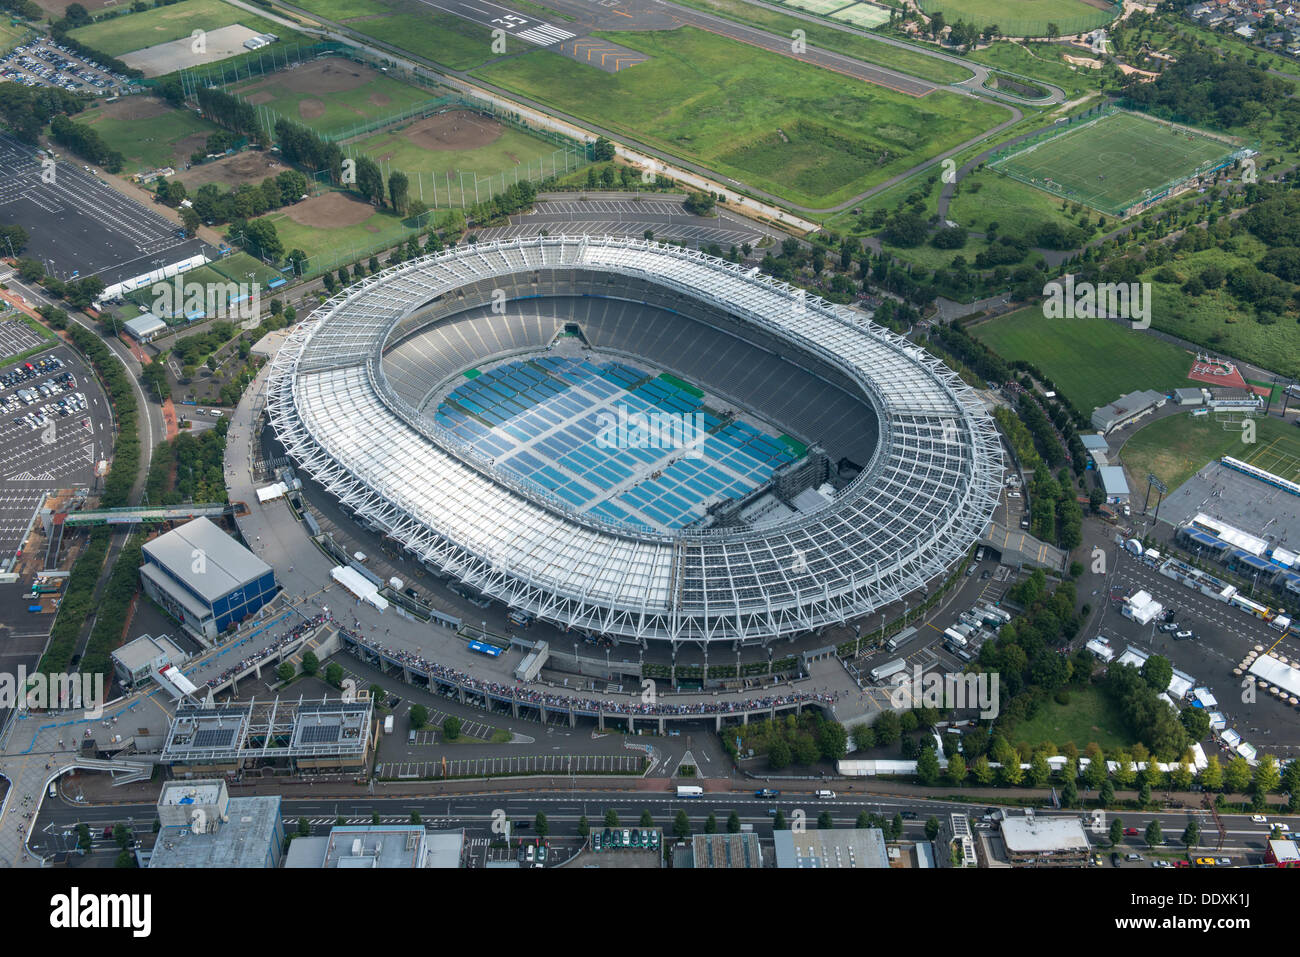 Tokyo Stadium: Tokyo, Japan: Aerial view of proposed venue for the 2020 Summer Olympic Games. (Photo by AFLO) Stock Photo